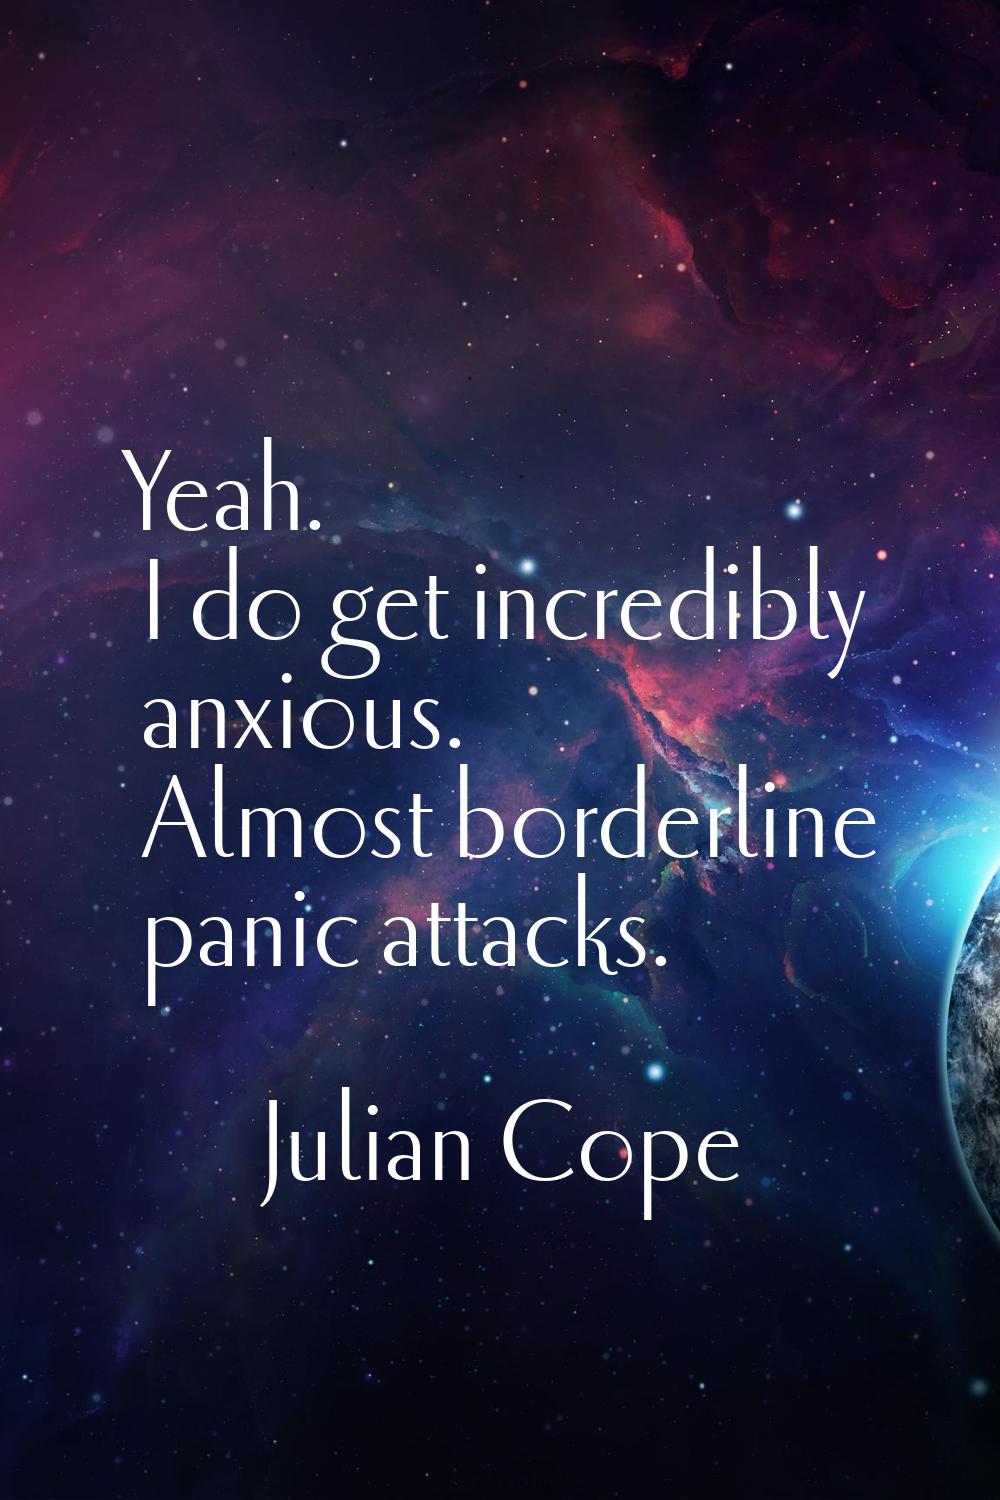 Yeah. I do get incredibly anxious. Almost borderline panic attacks.